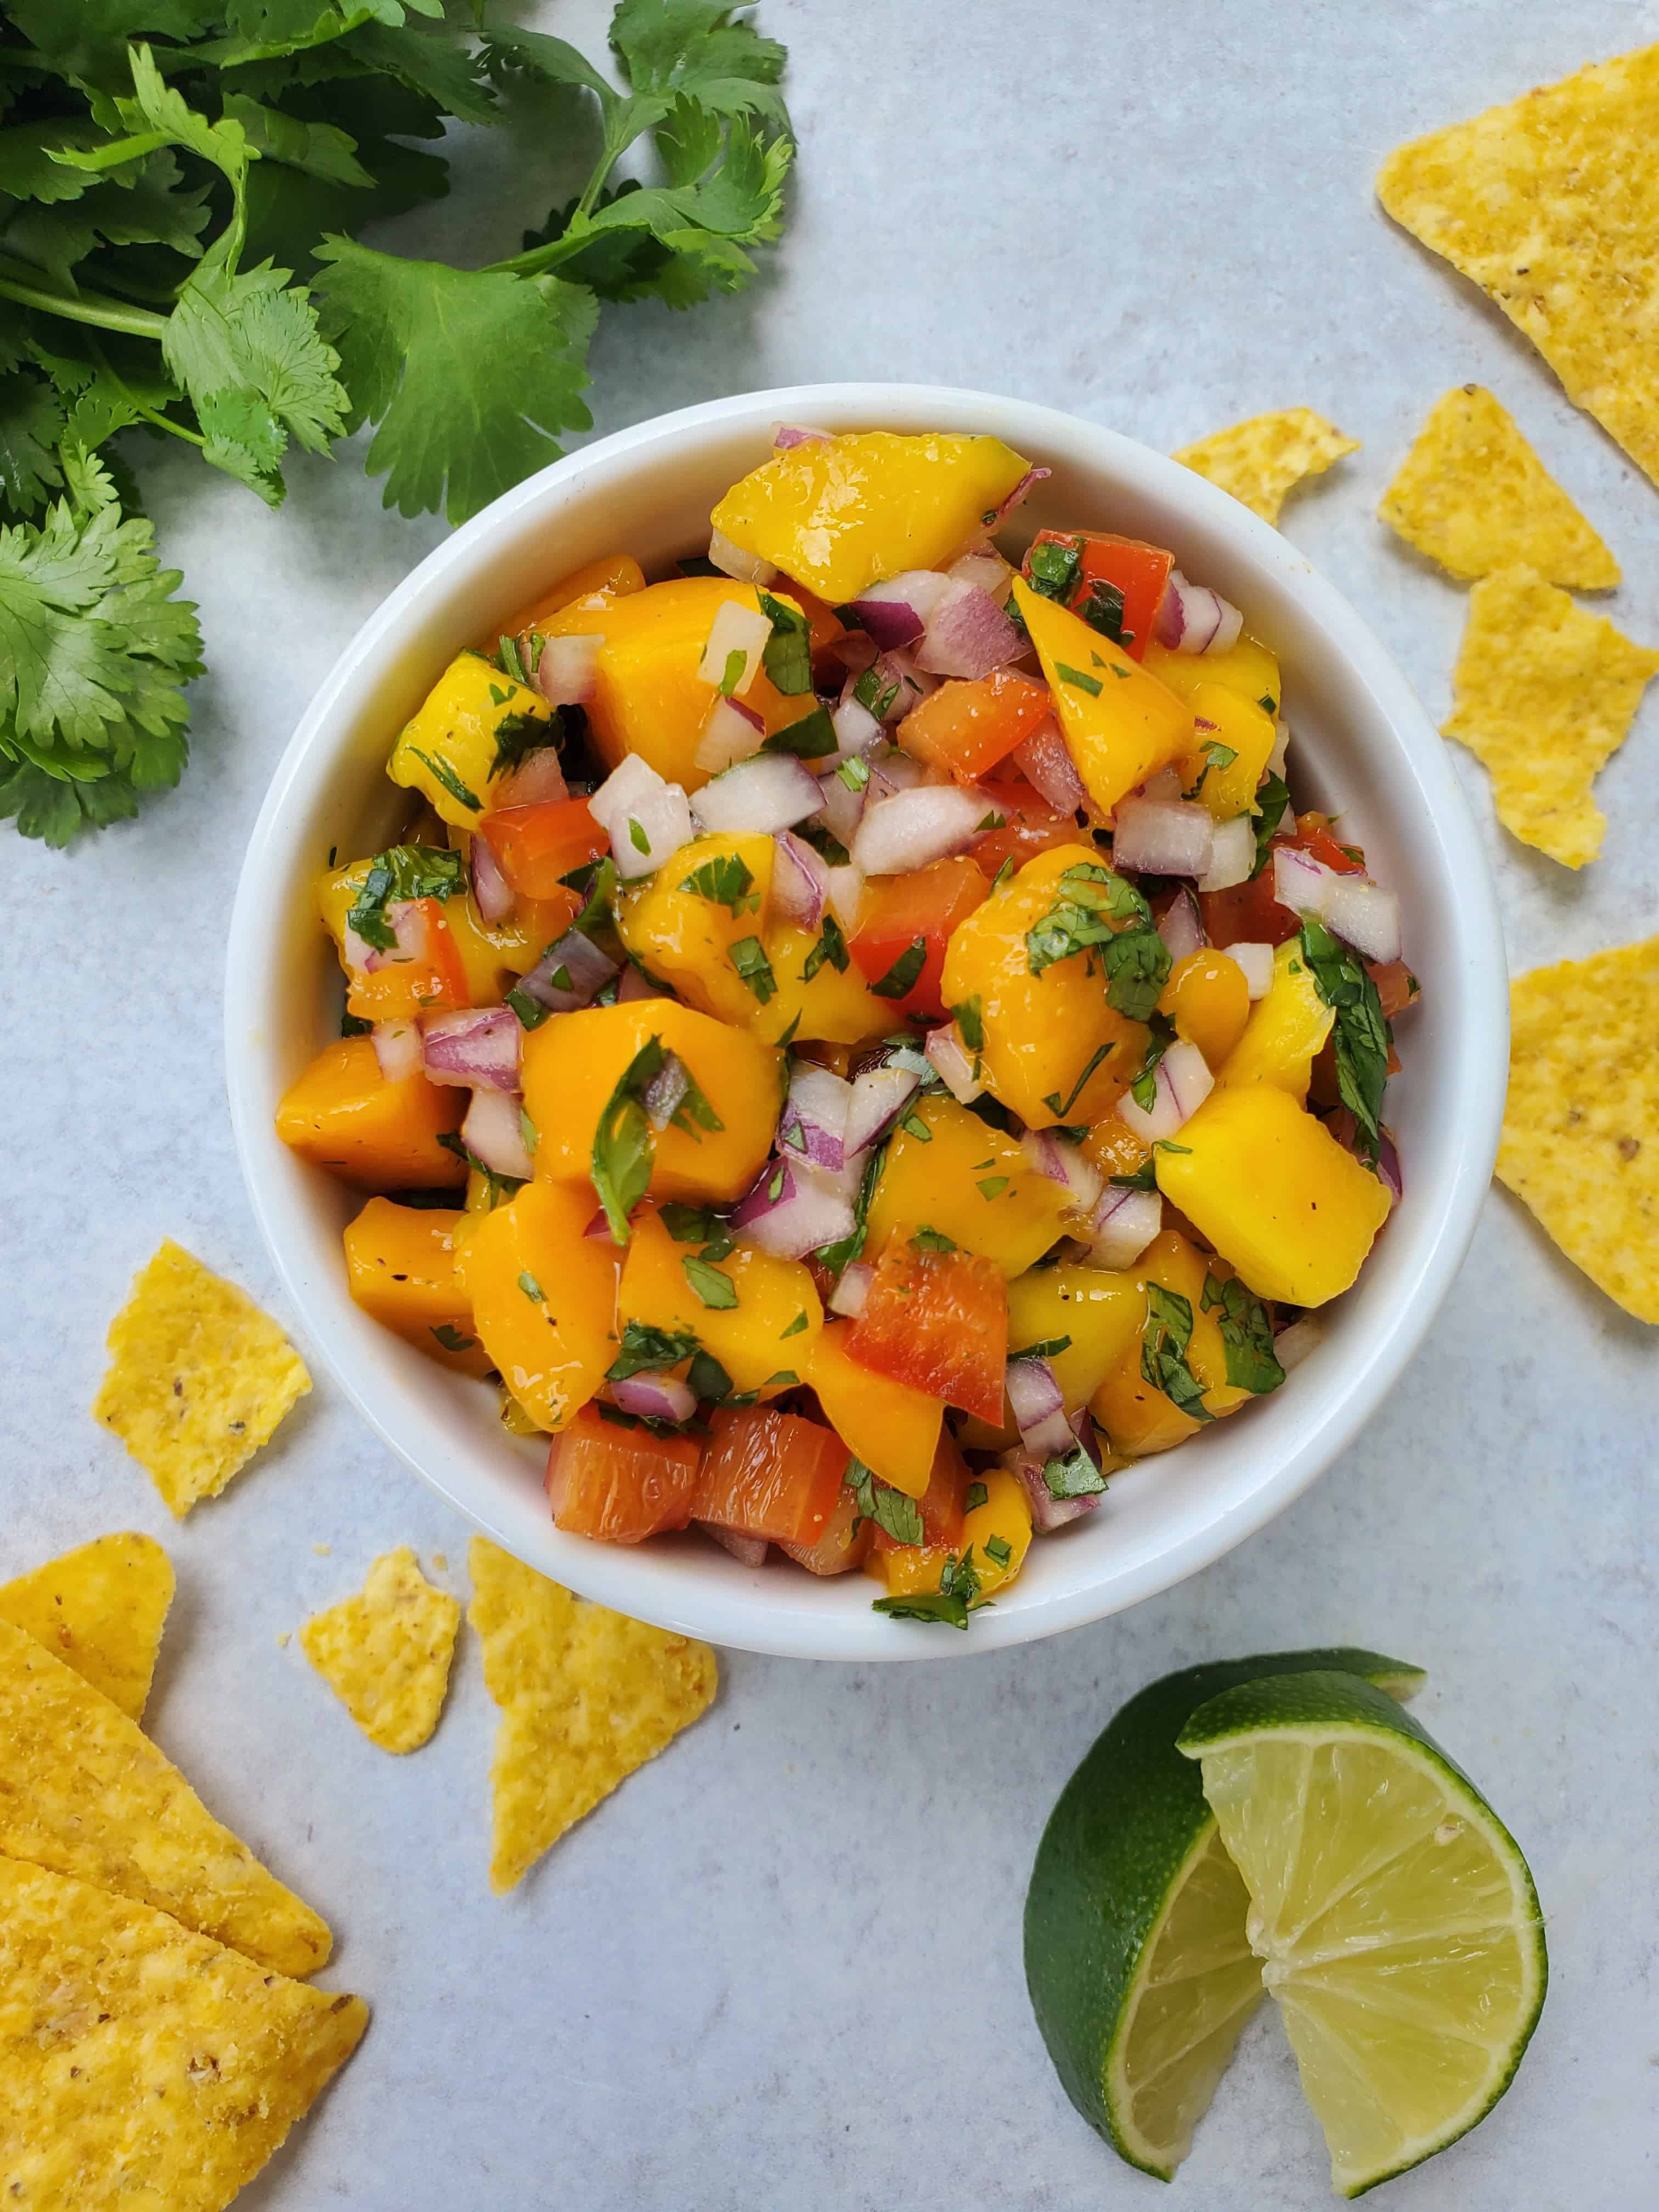 Mango salsa with mango, red pepper, red onion, cilantro in a bowl with chips, cilantro, and lime as garnish